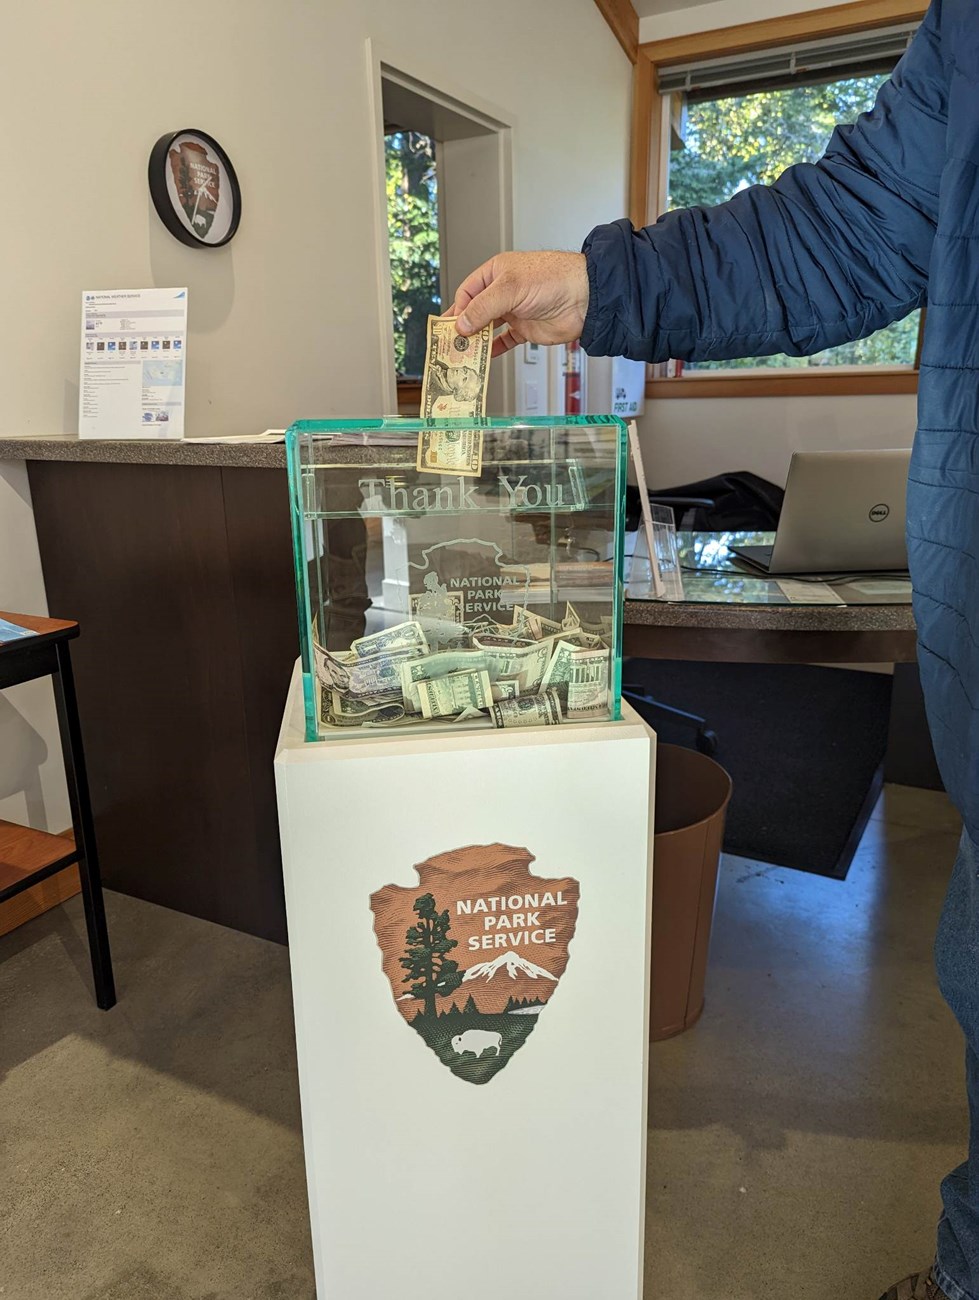 a hand putting money into a donation box